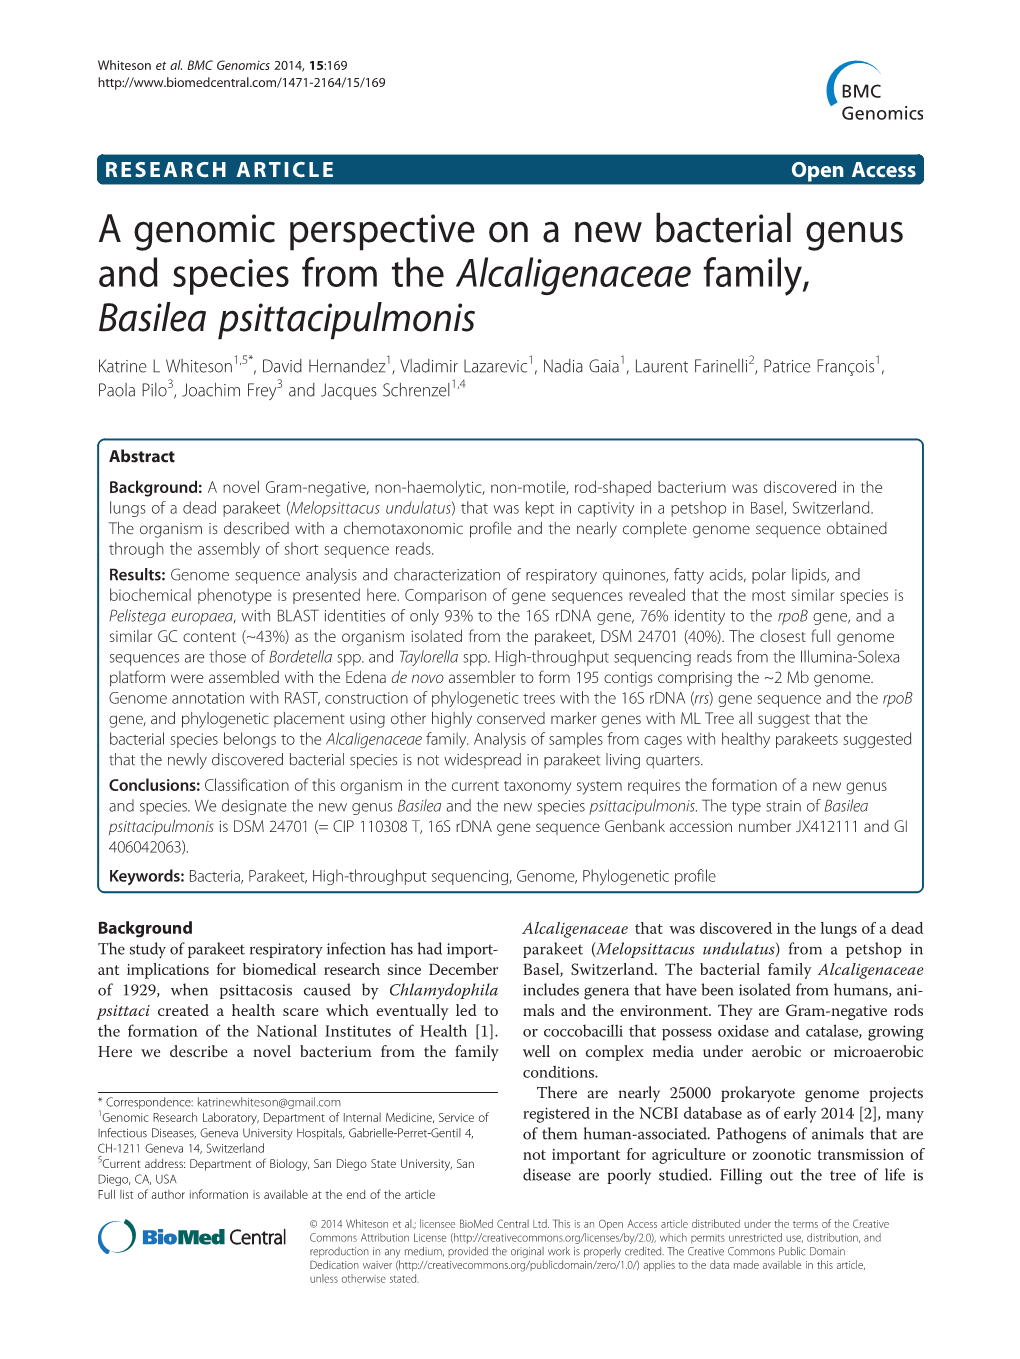 A Genomic Perspective on a New Bacterial Genus and Species From